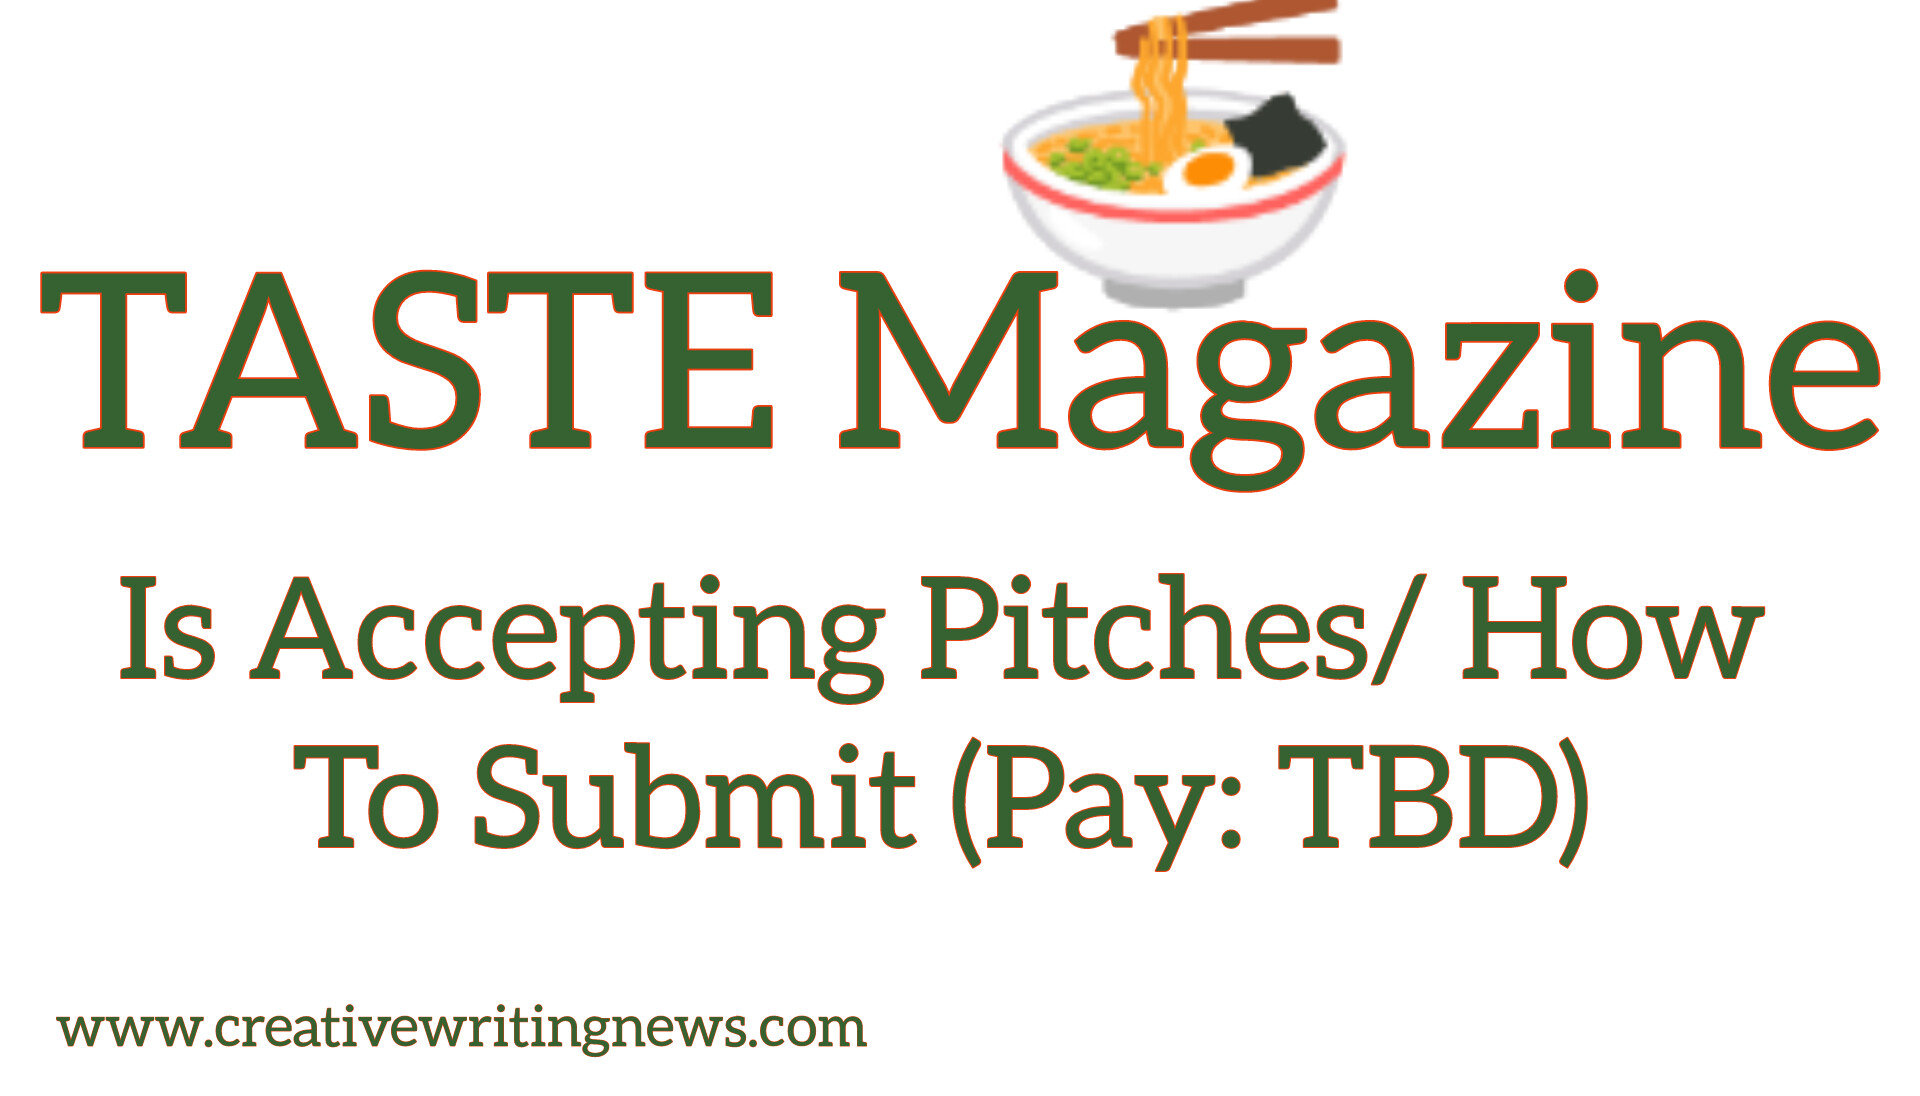 TASTE Magazine Is Accepting Pitches/ How To Submit (Pay: TBD) – Creative Writing News